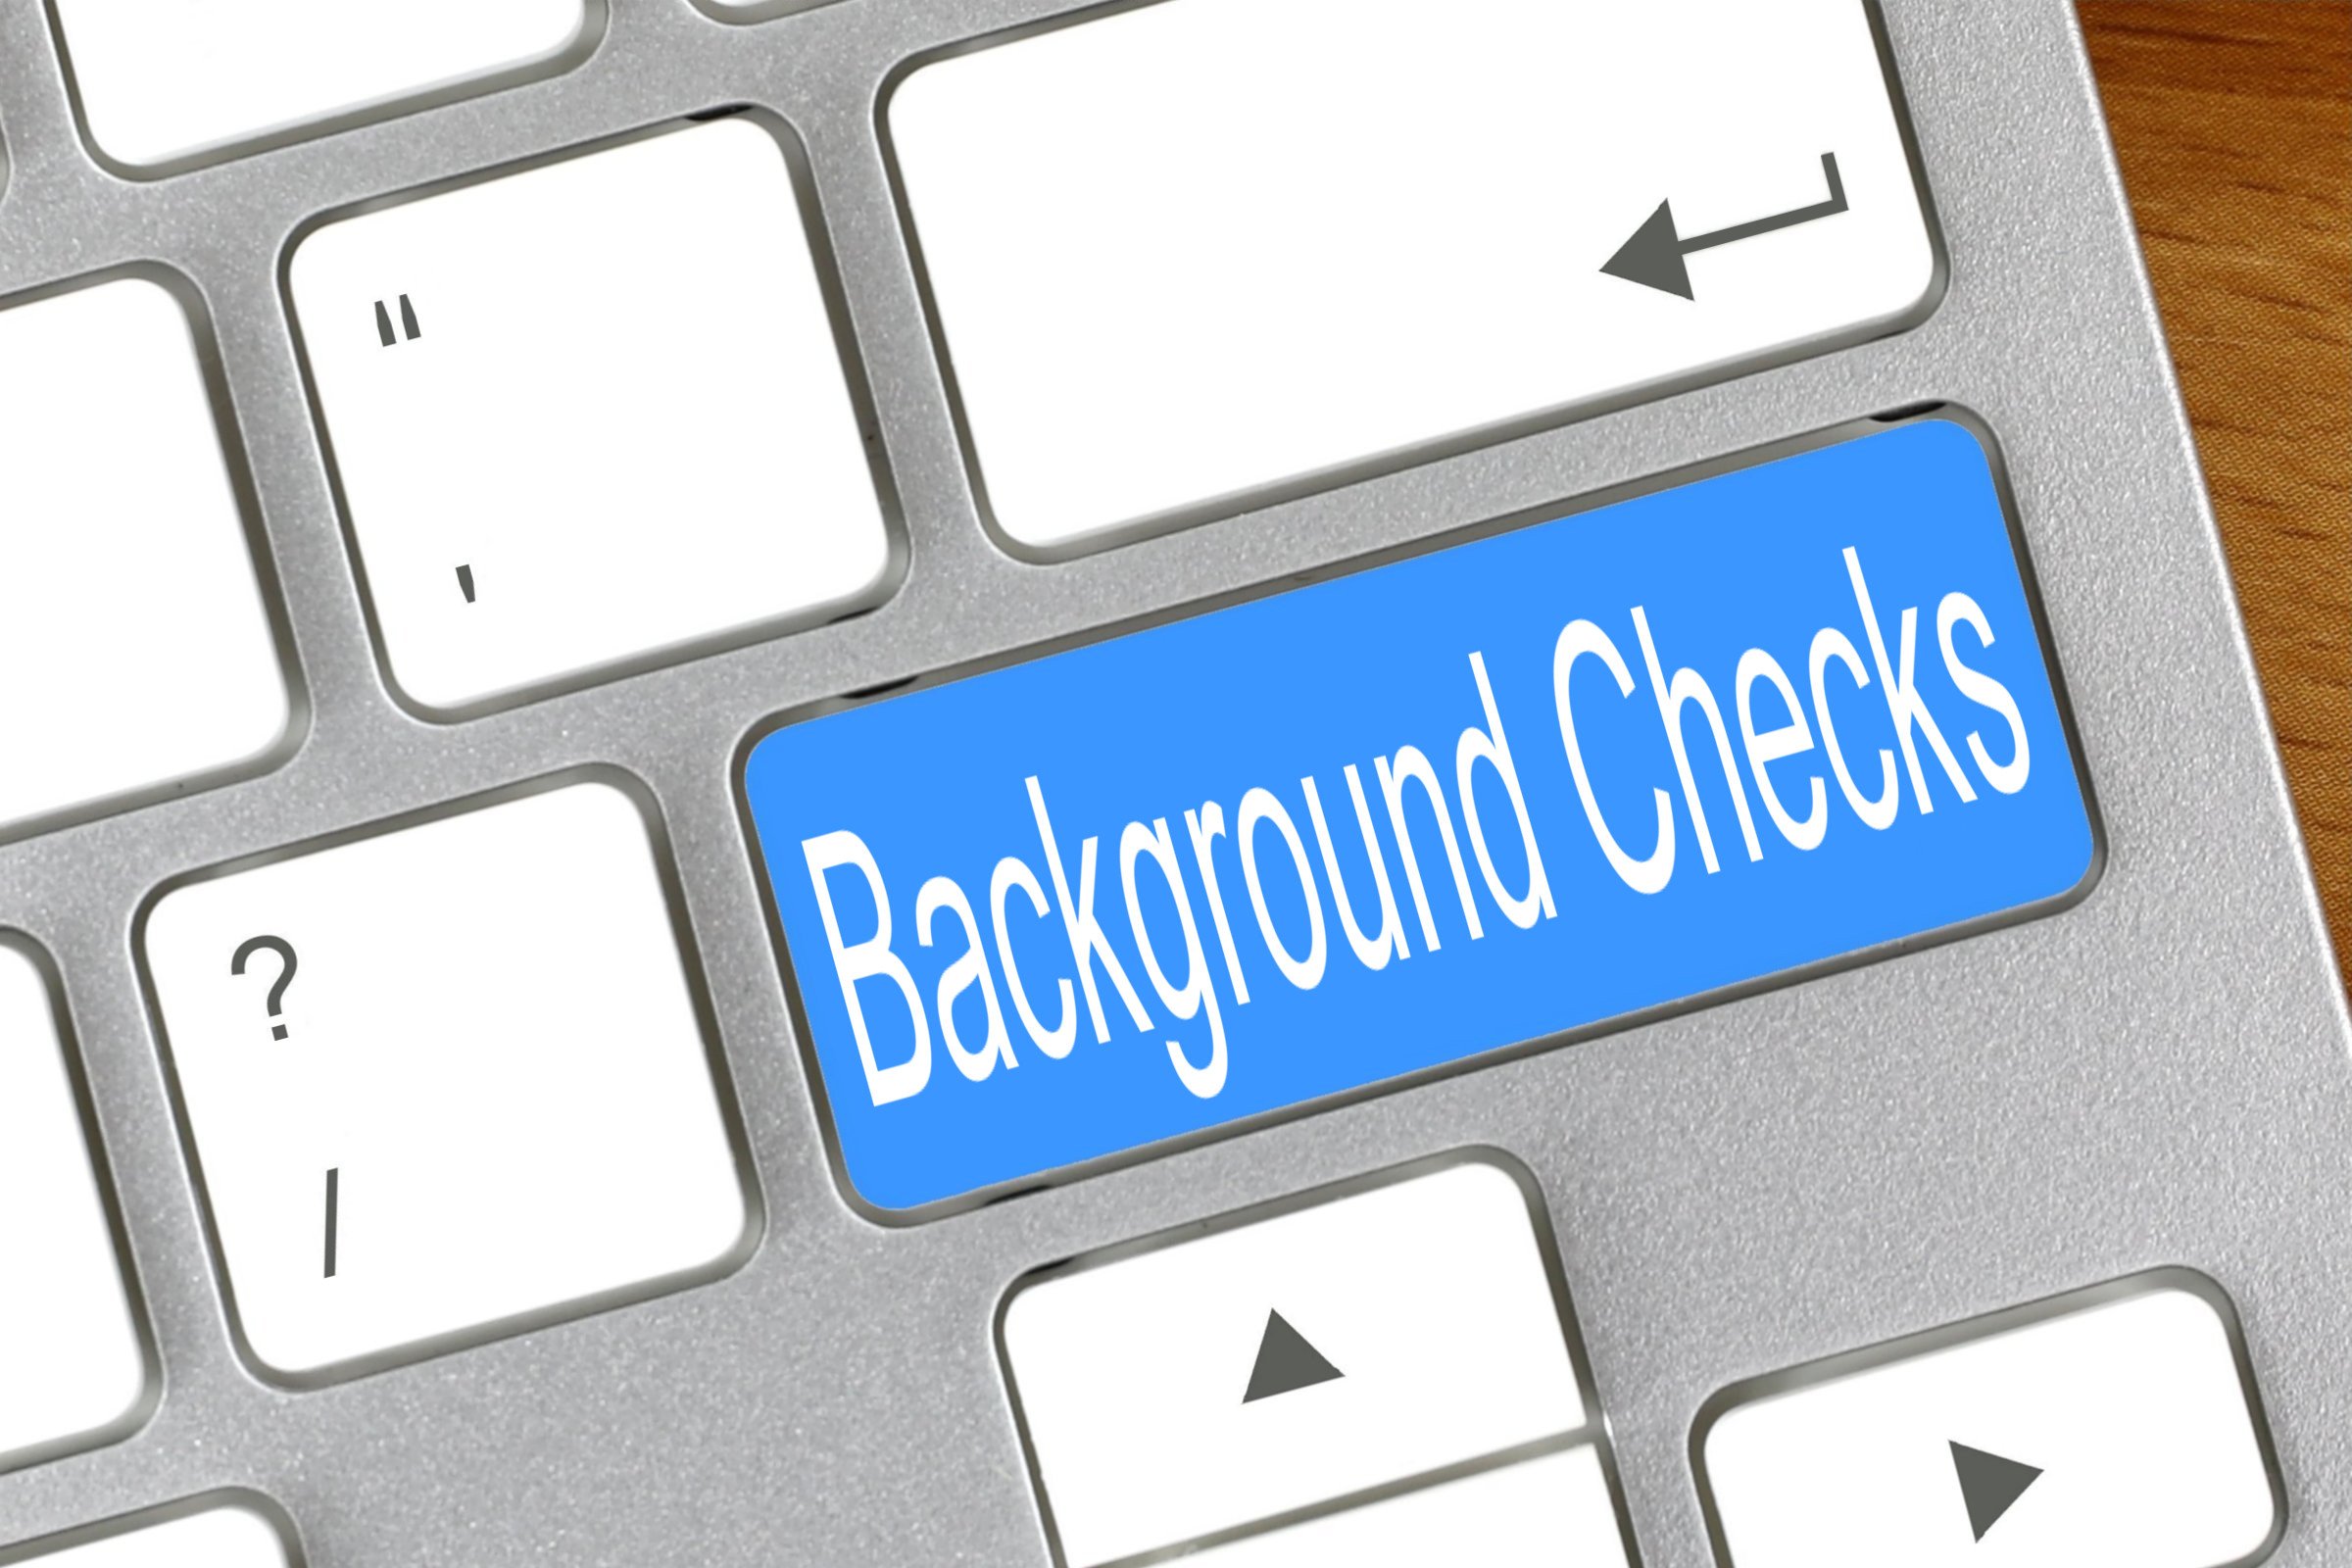 Free of Charge Creative Commons background checks Image - Keyboard 2